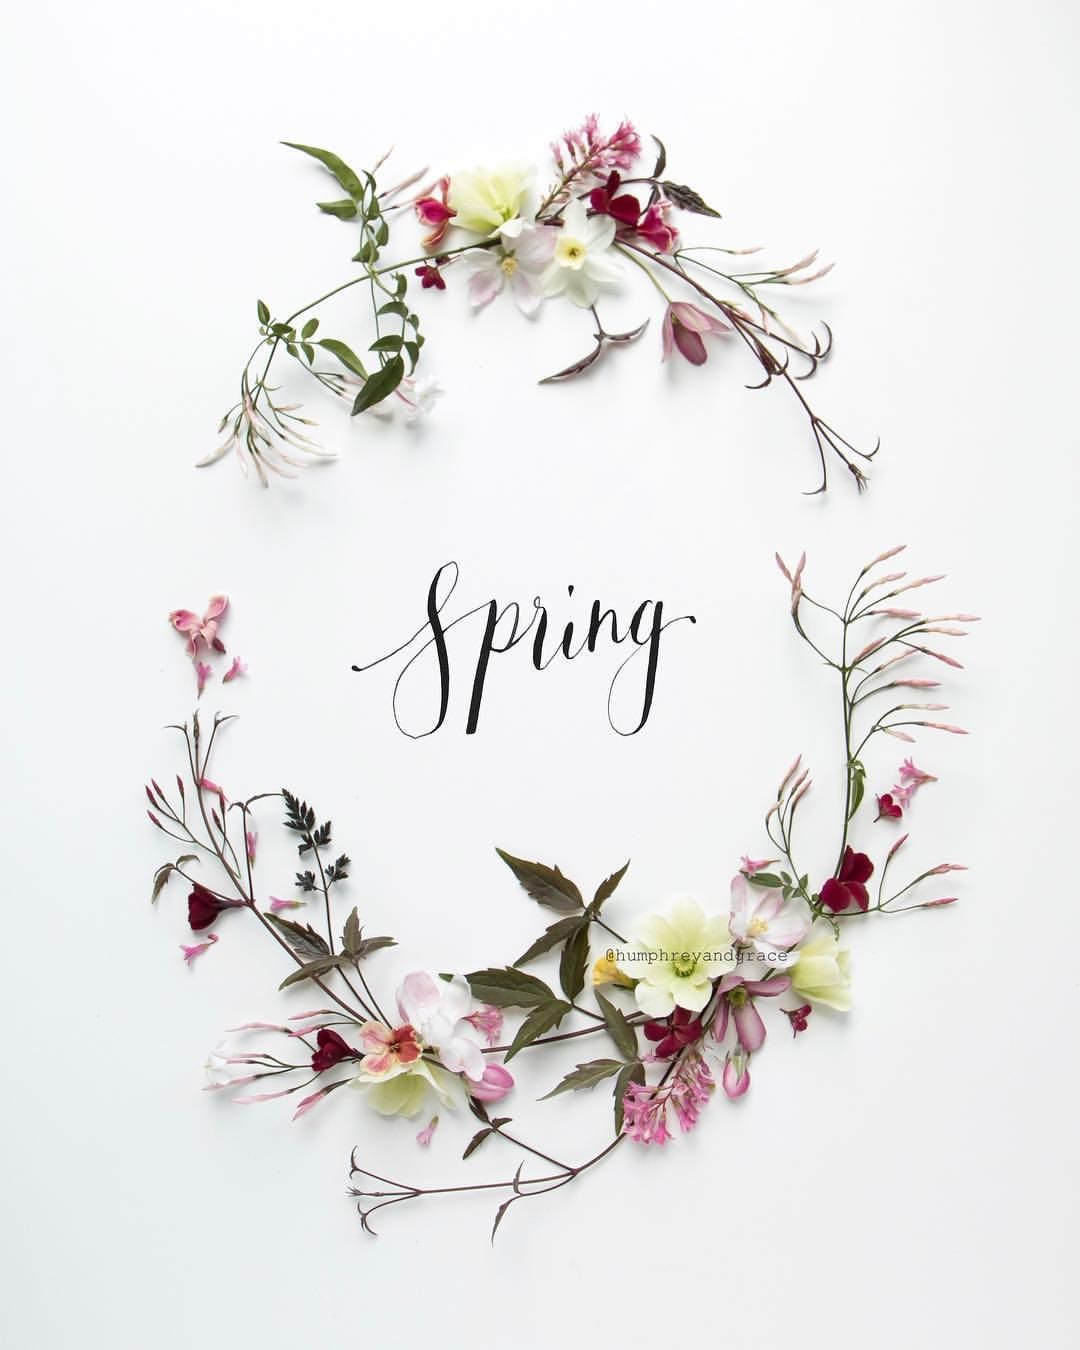 Hello Spring! Almost spoilt for choice with flowers from